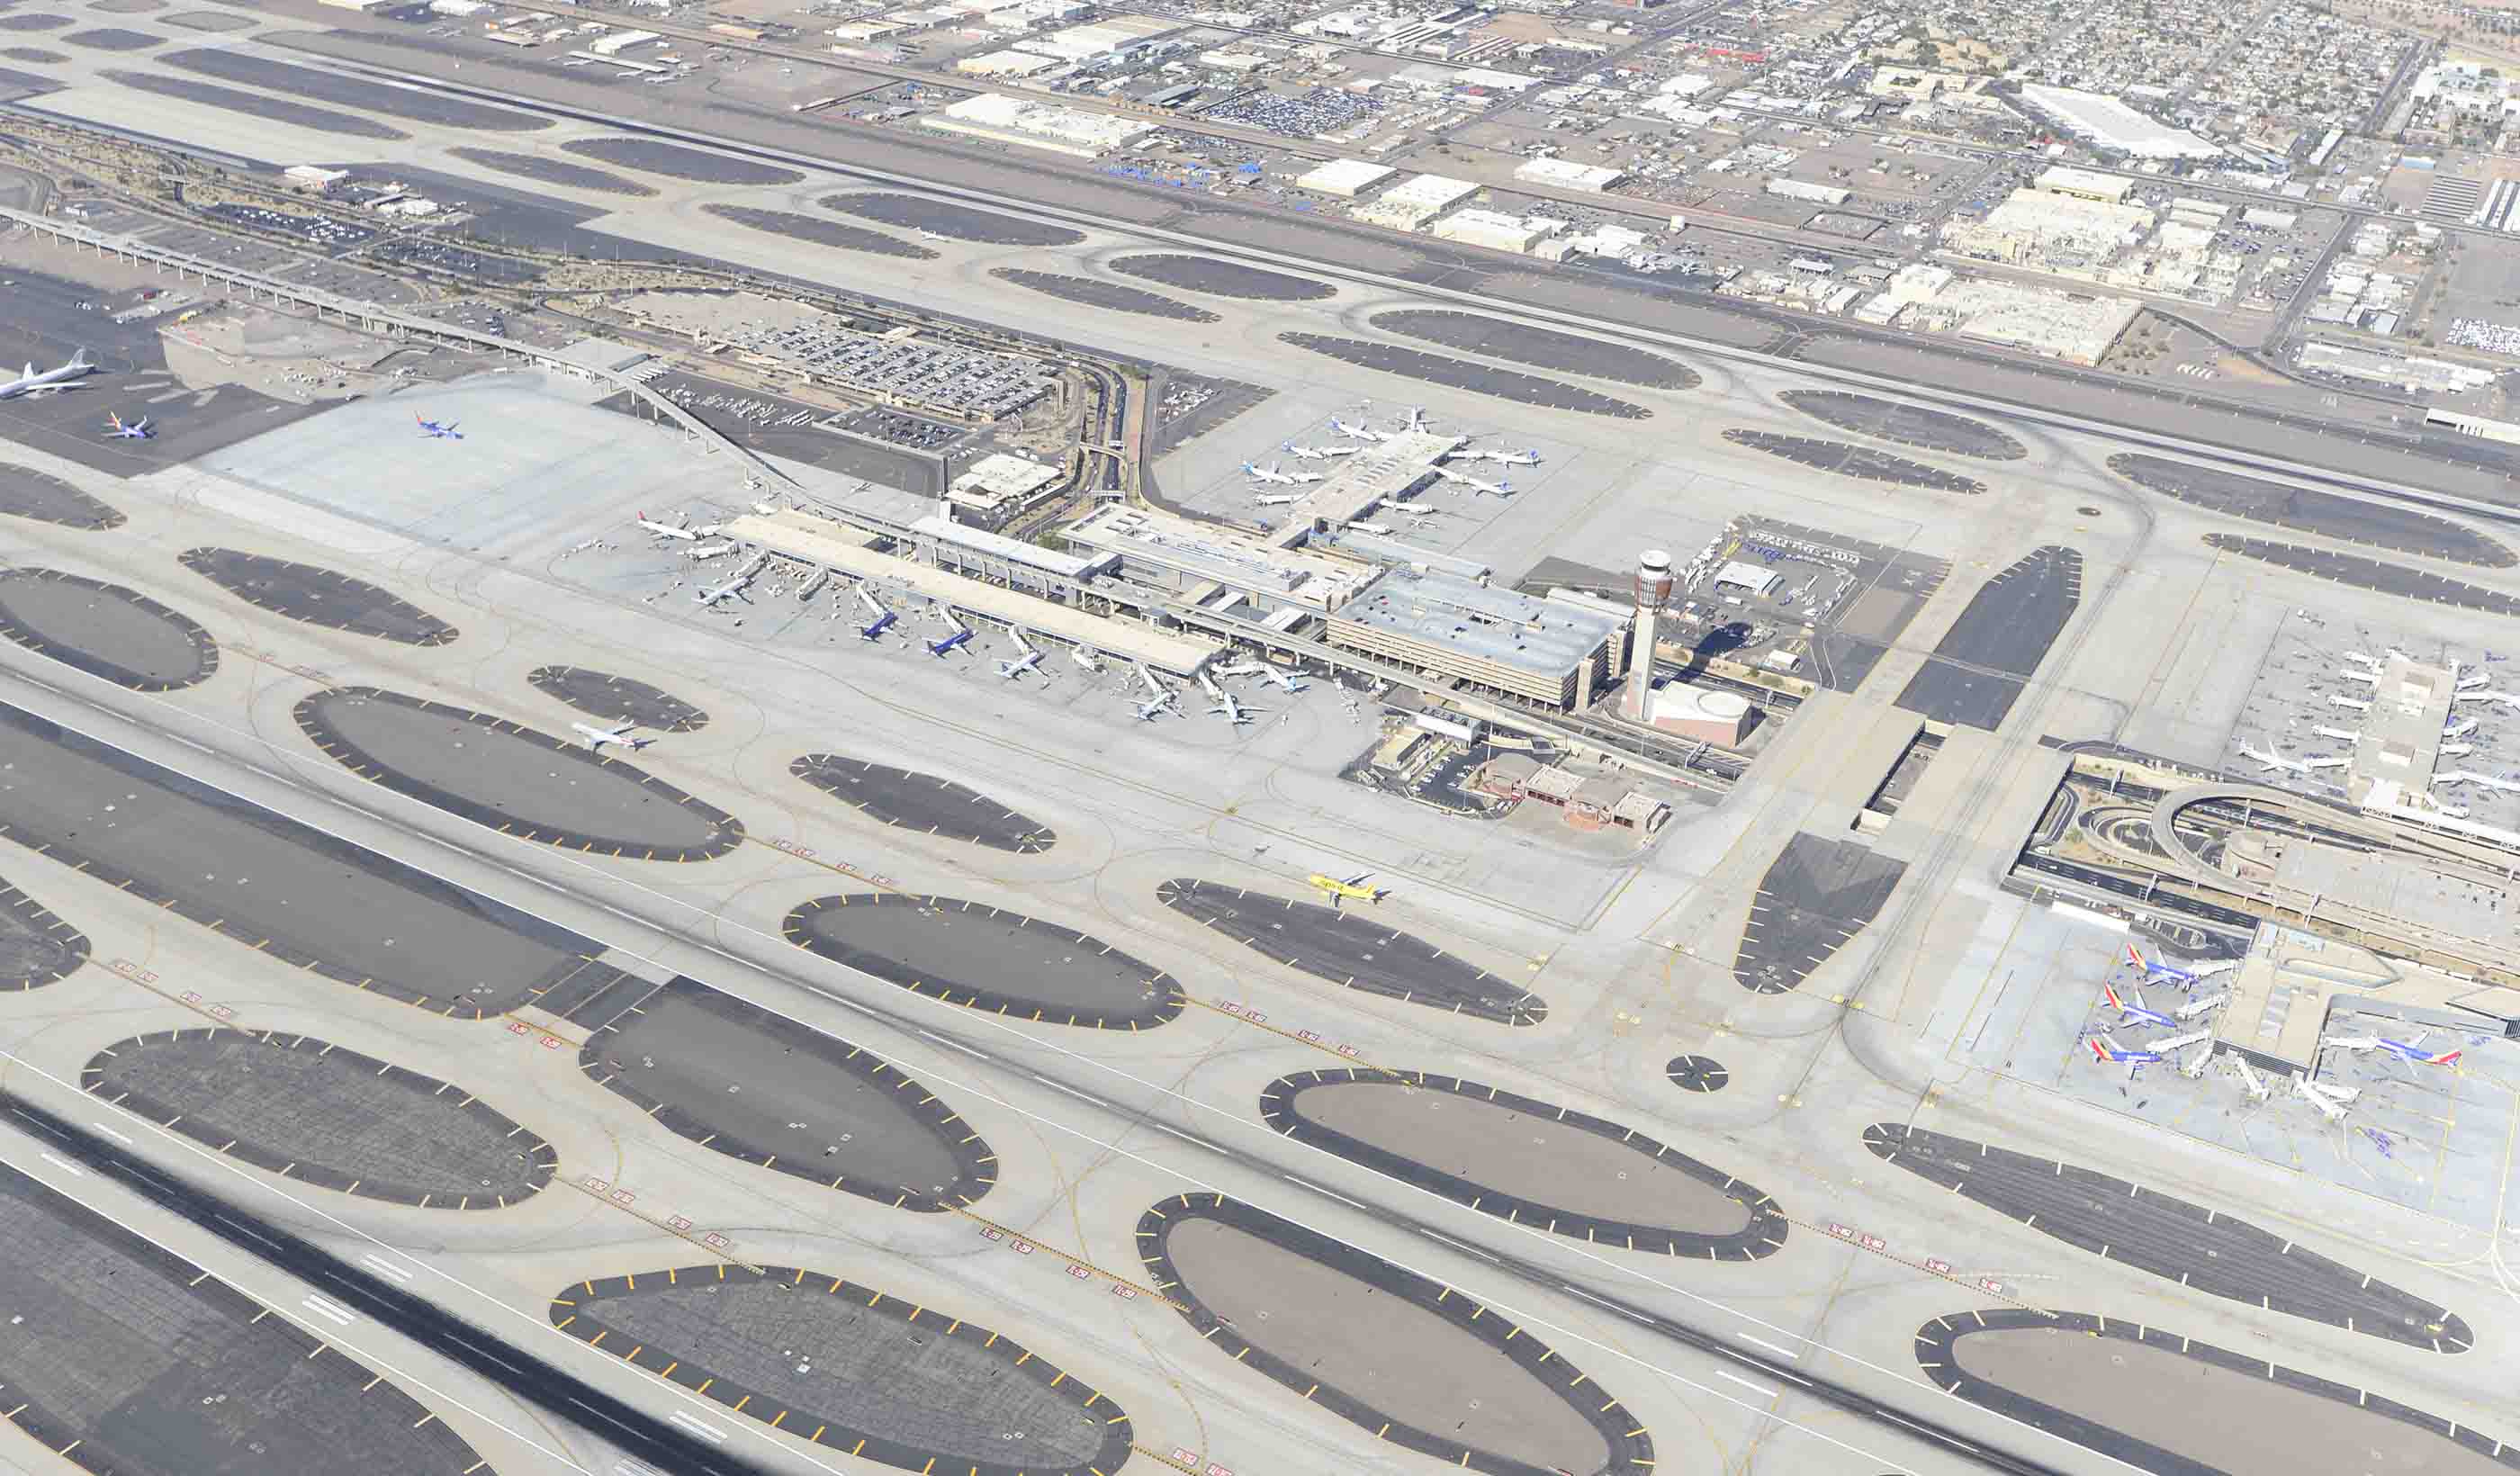 PHX Terminal 2 Demolition, Apron Reconstruction, and Mural Relocation